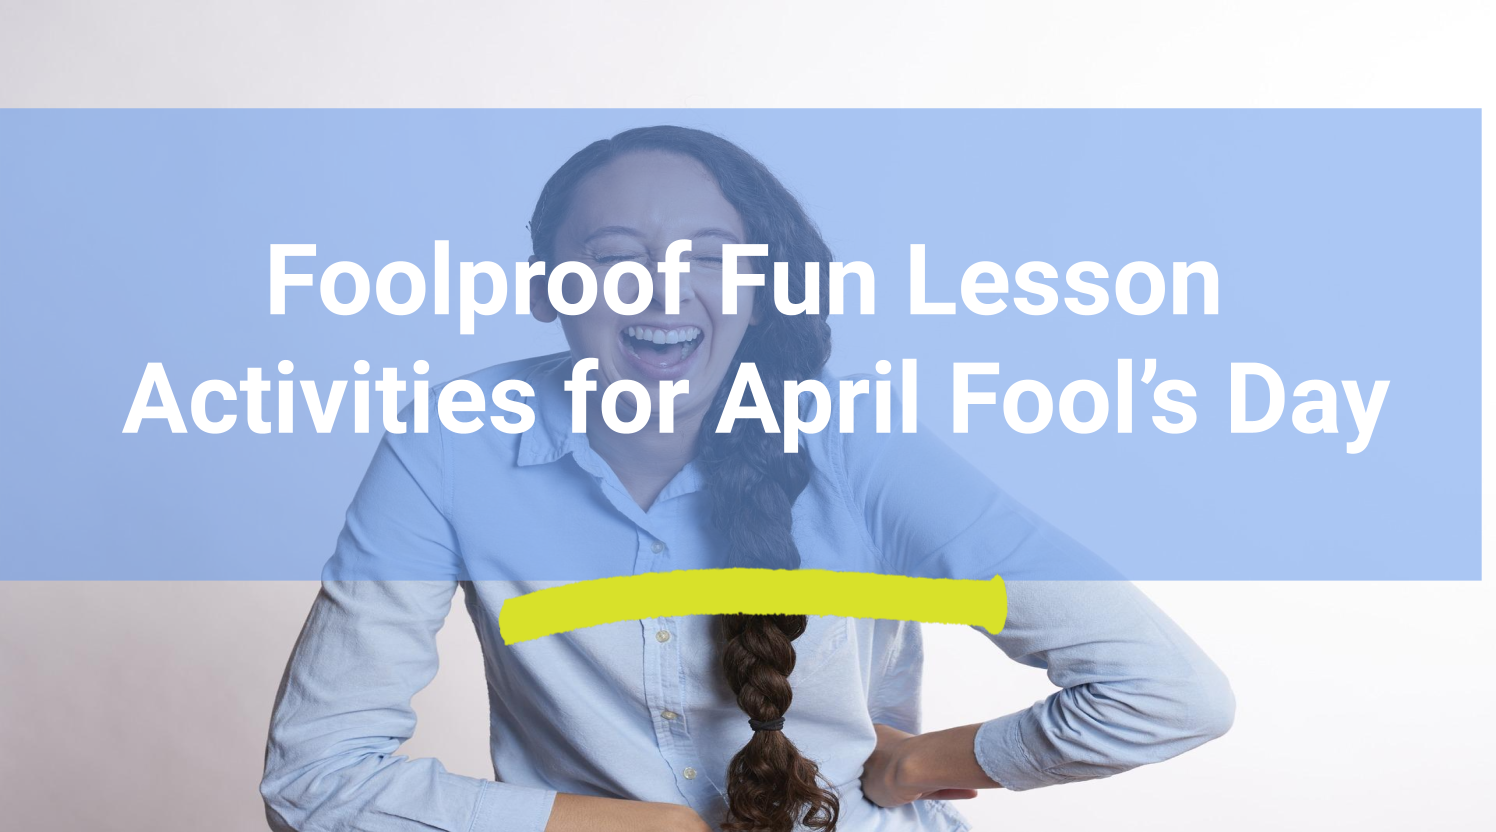 Foolproof Fun Lesson Activities for April Fool's Day